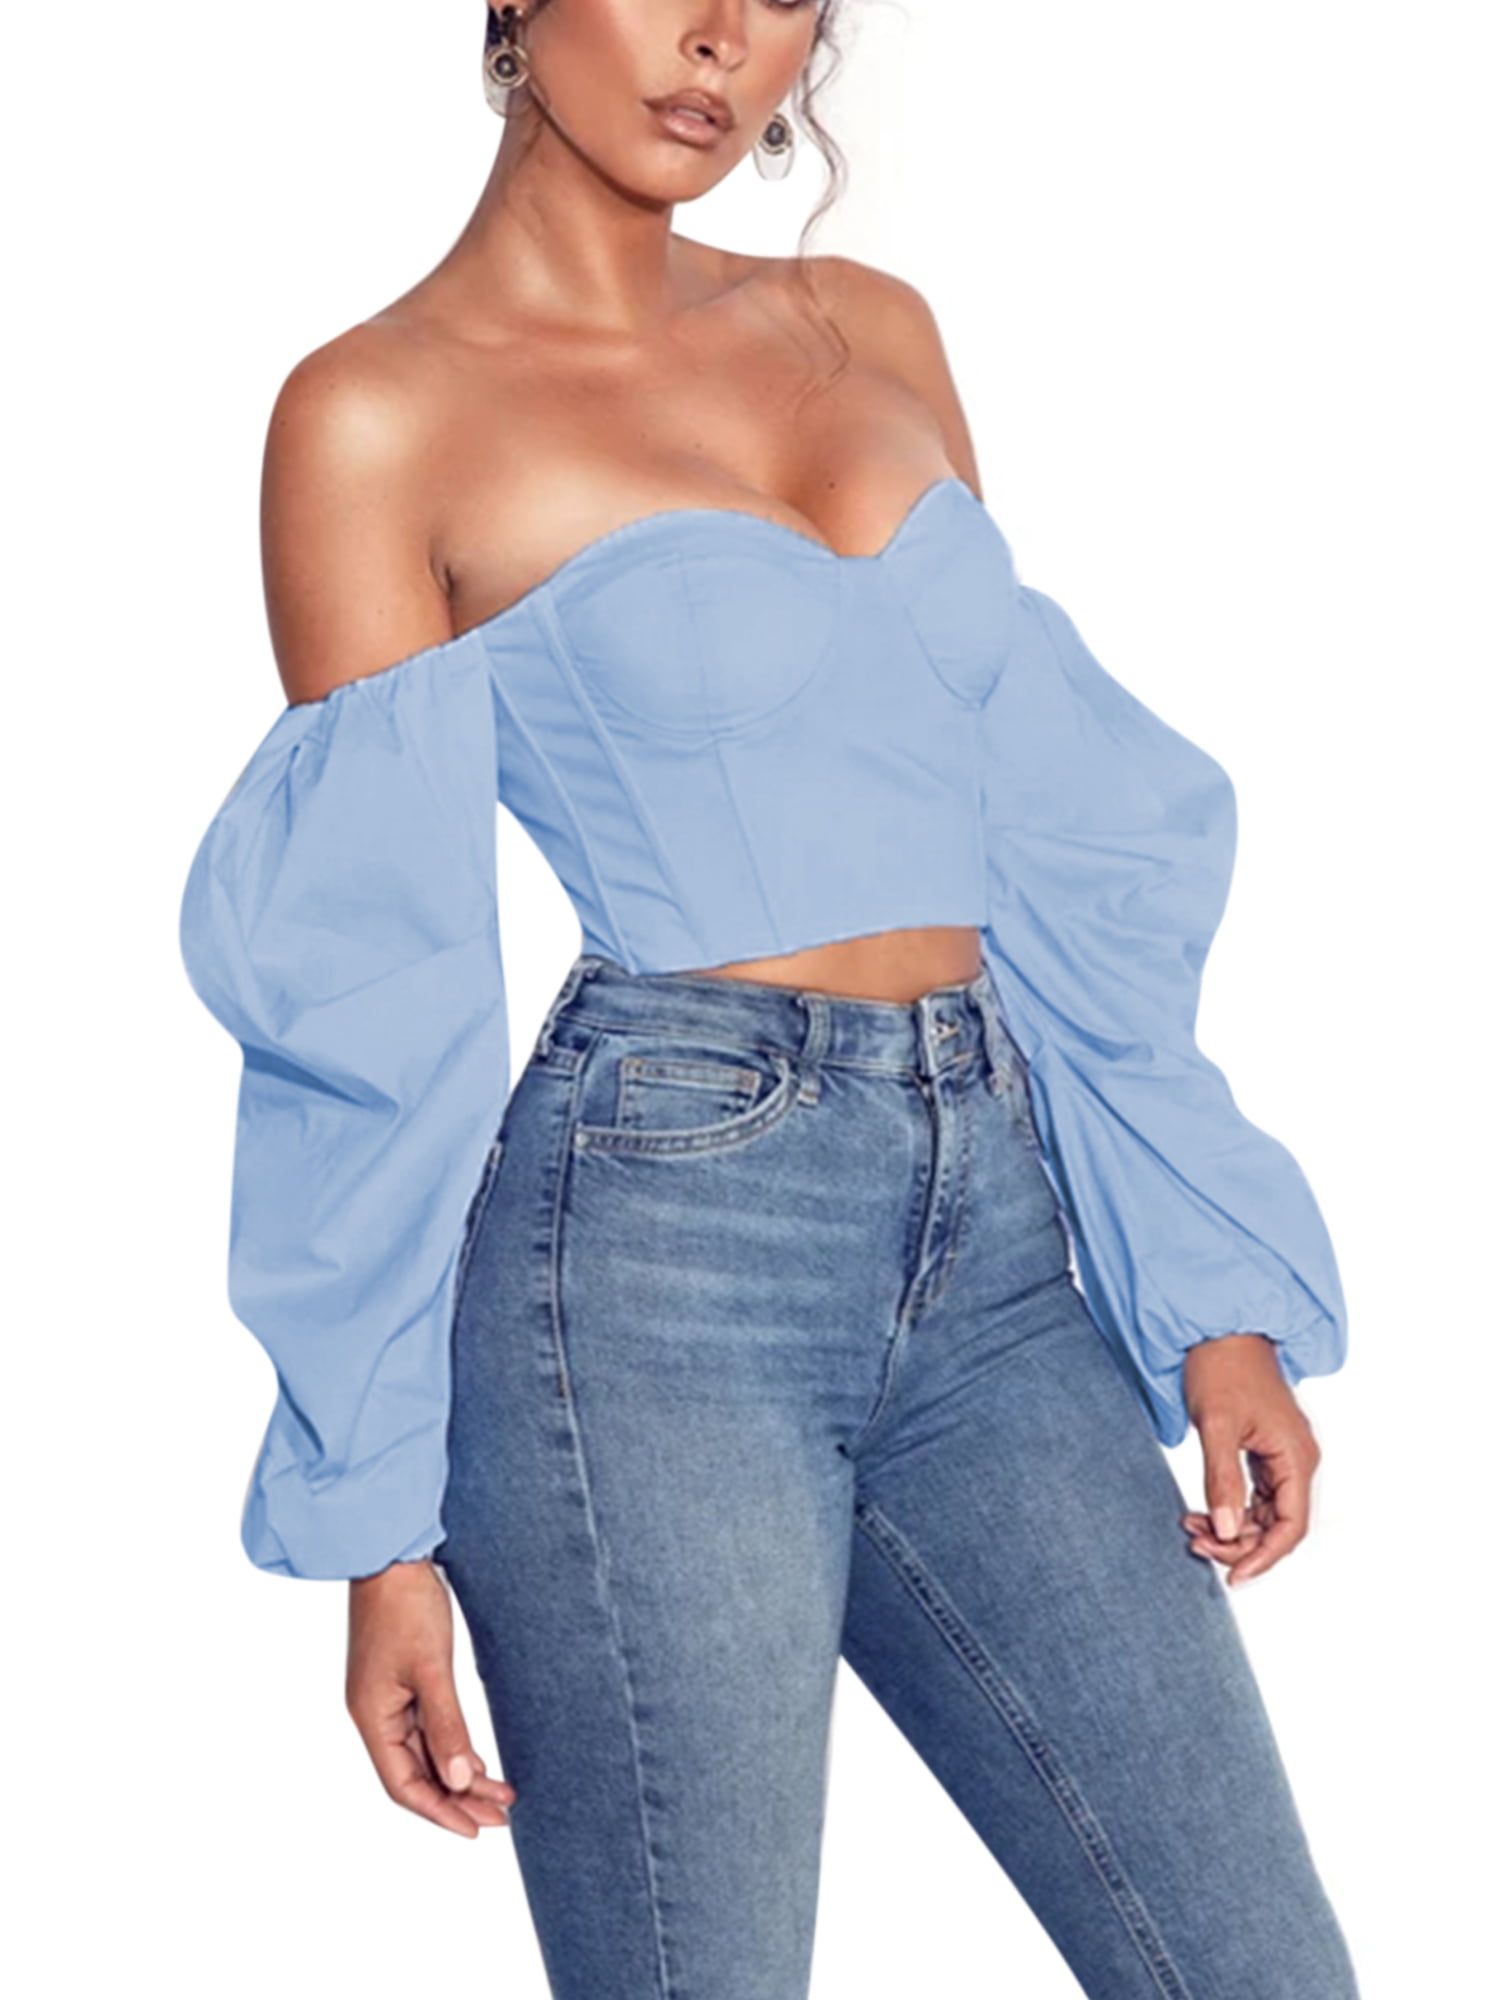 Women Casual Off the Shoulder Blouse Long Sleeve Strapless Cropped T-shirt Tops